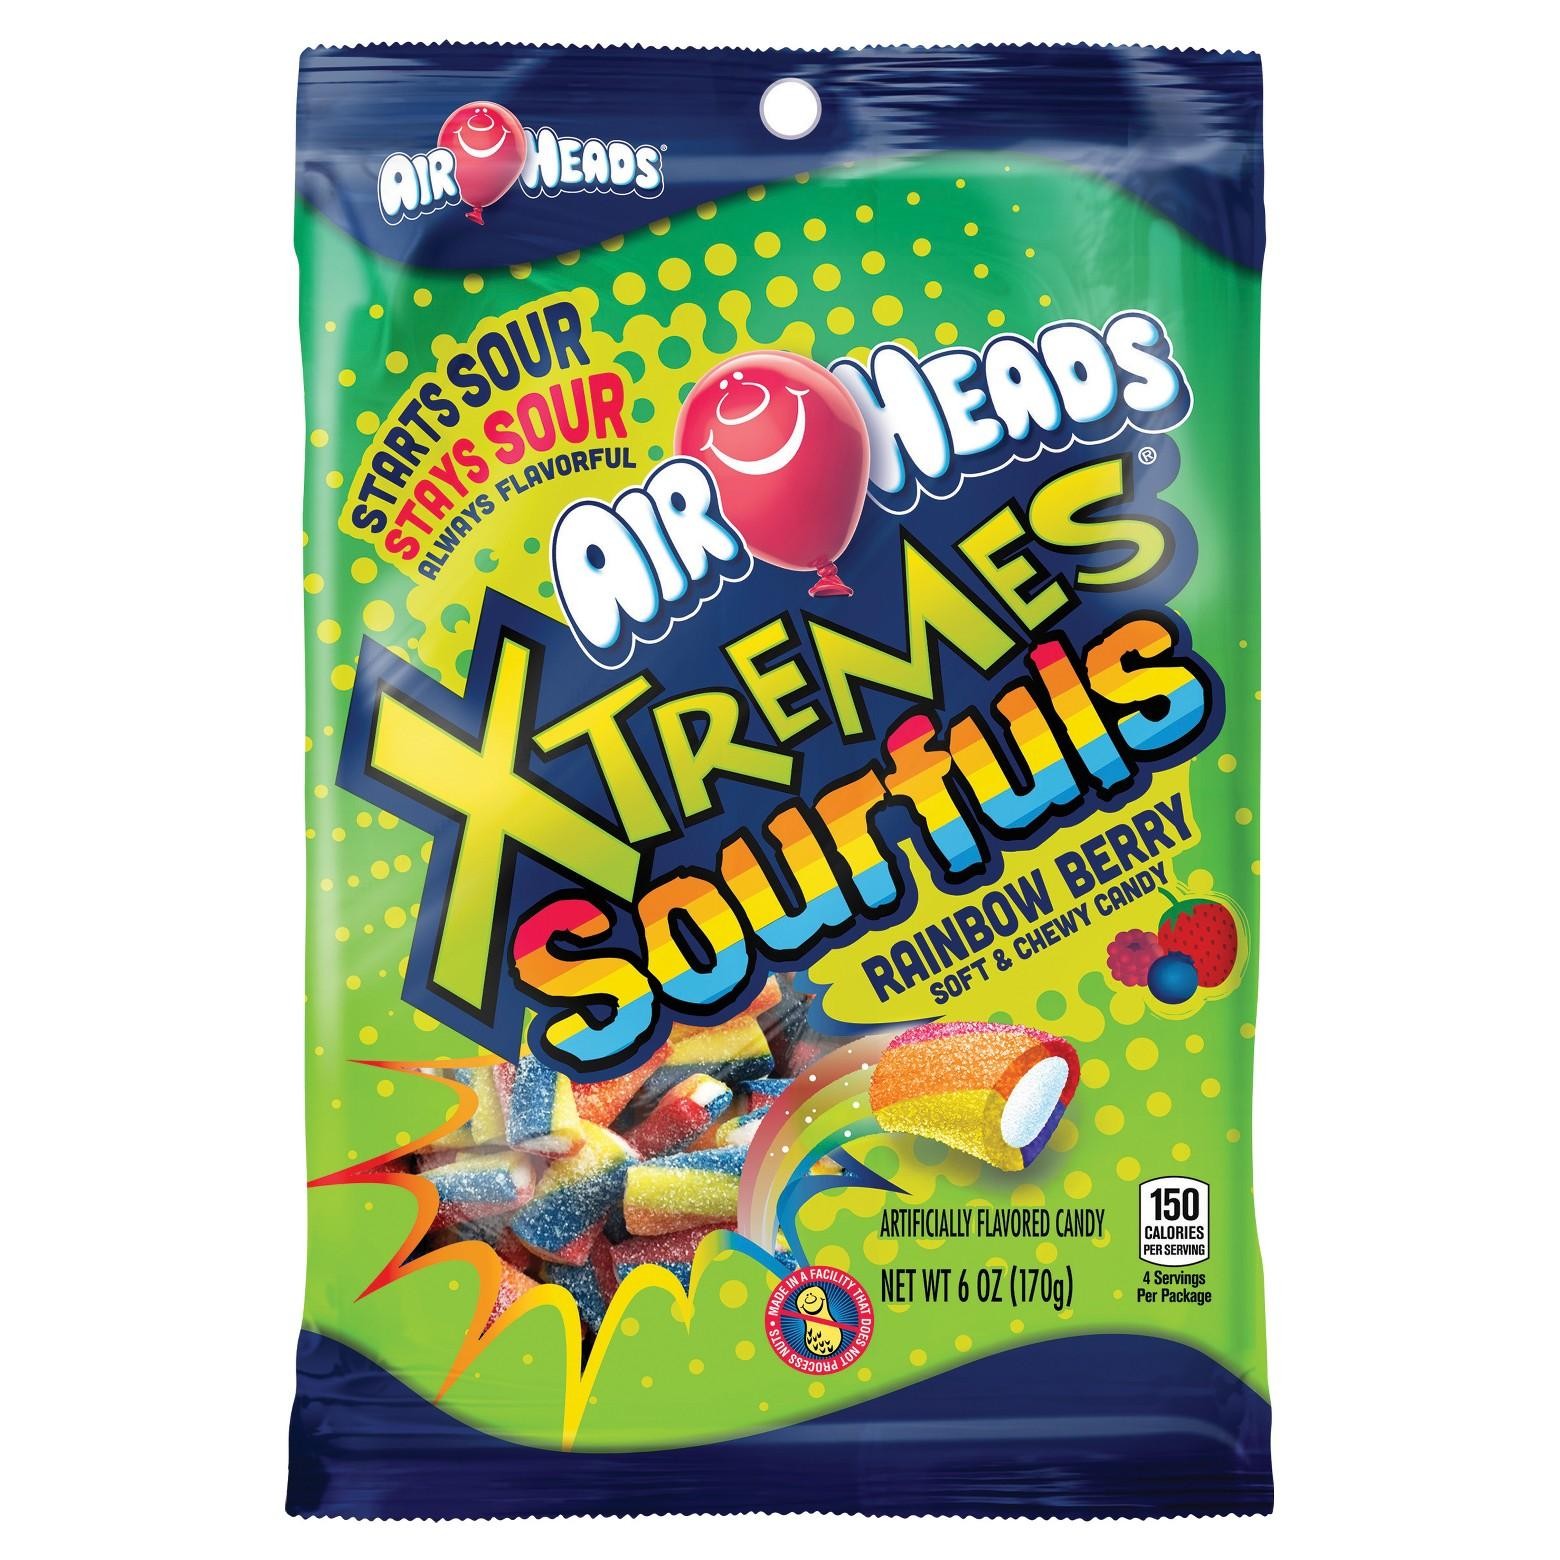 Airheads Xtremes Sourfuls, Rainbow Berry - 6 Oz